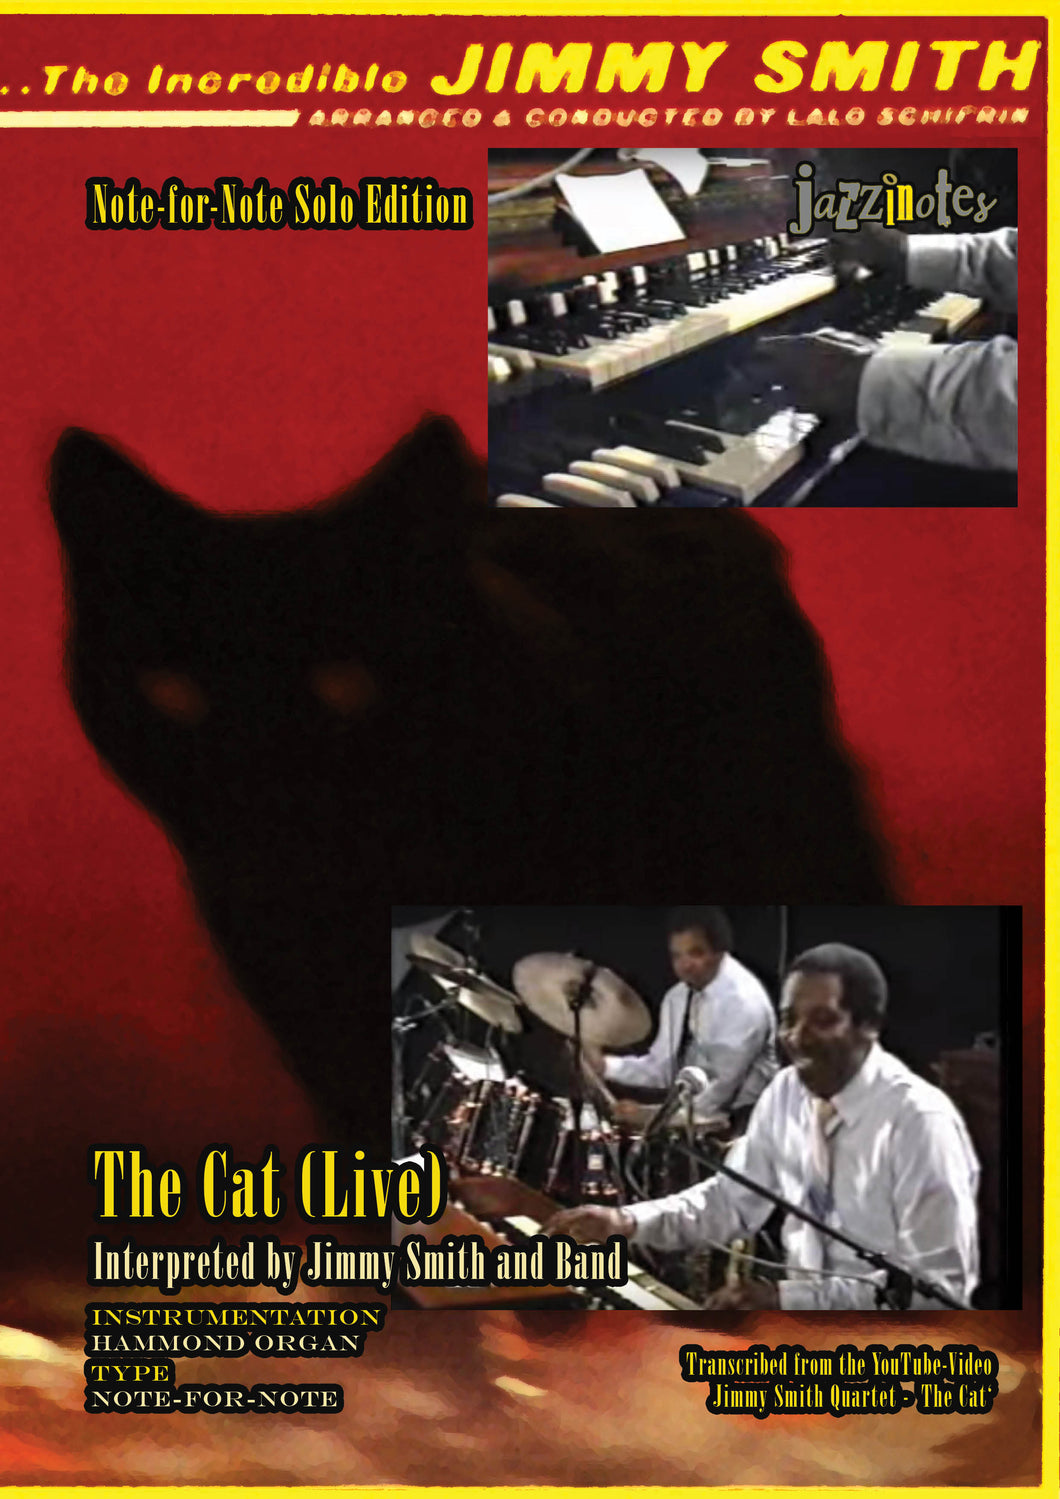 Smith, Jimmy: The Cat (Live) - Sheet Music Download